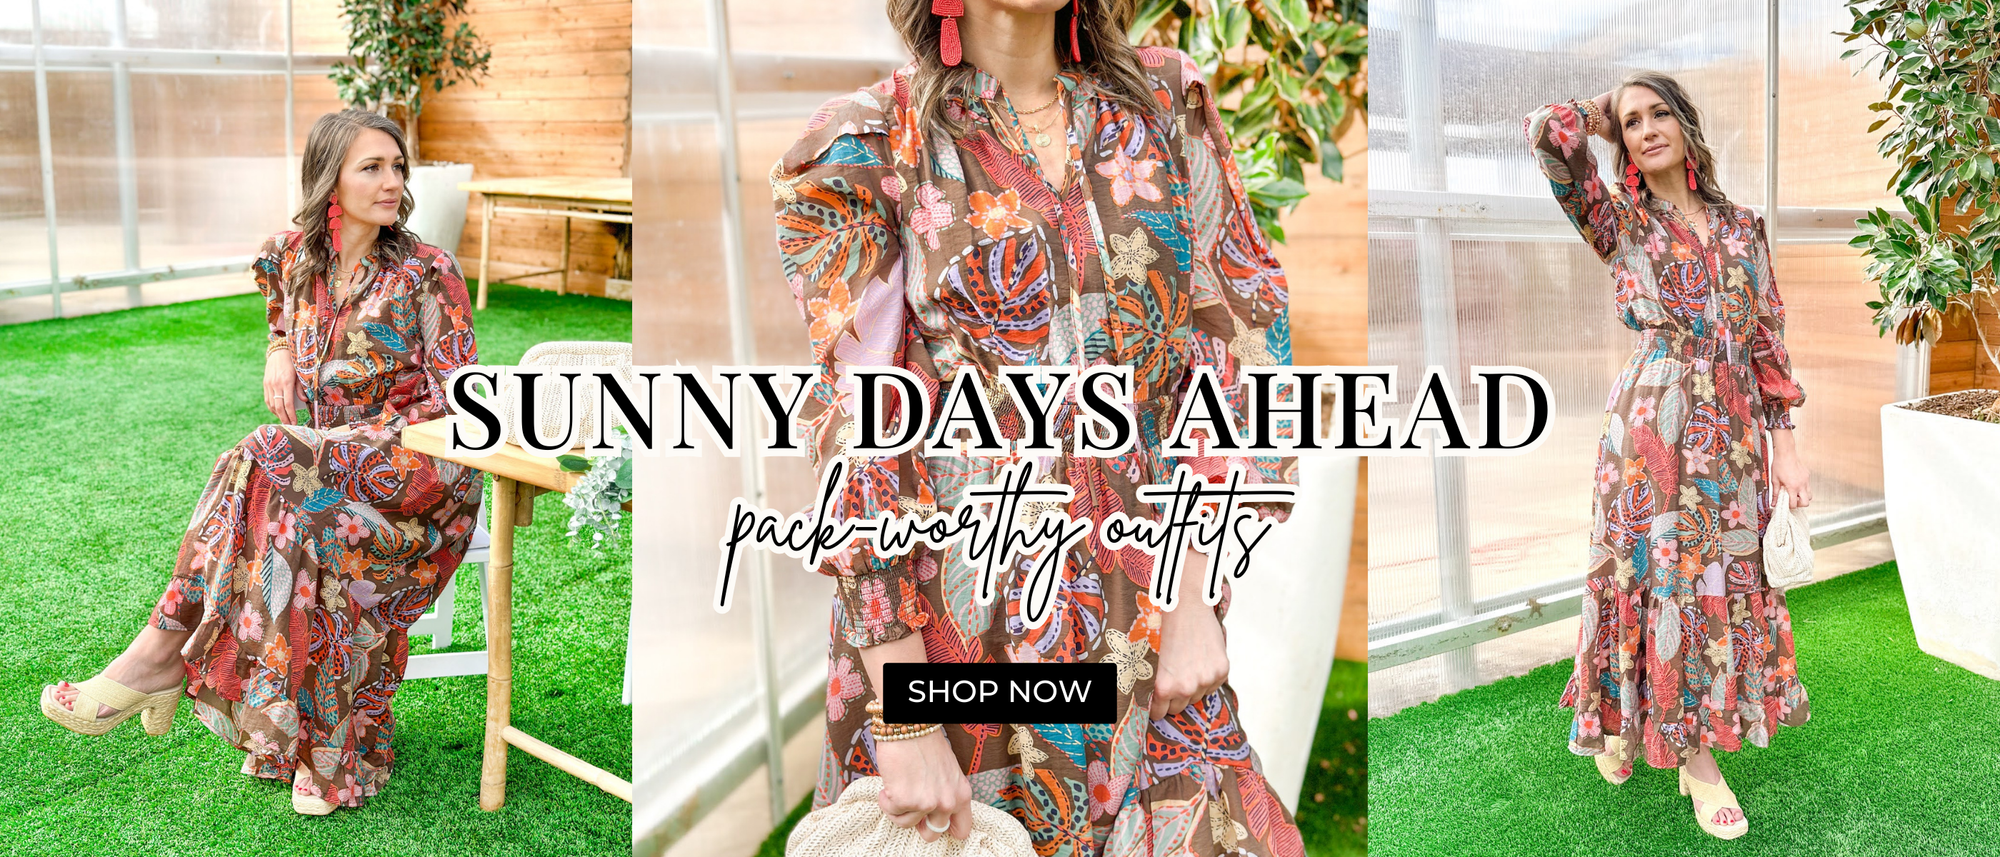 Sunny Days Ahead, pack-worthy outfits, shop now. Model wearing a tropical floral printed maxi dress with long sleeves and an elastic waist styled with raffia heels, beaded earrings and gold jewelry.